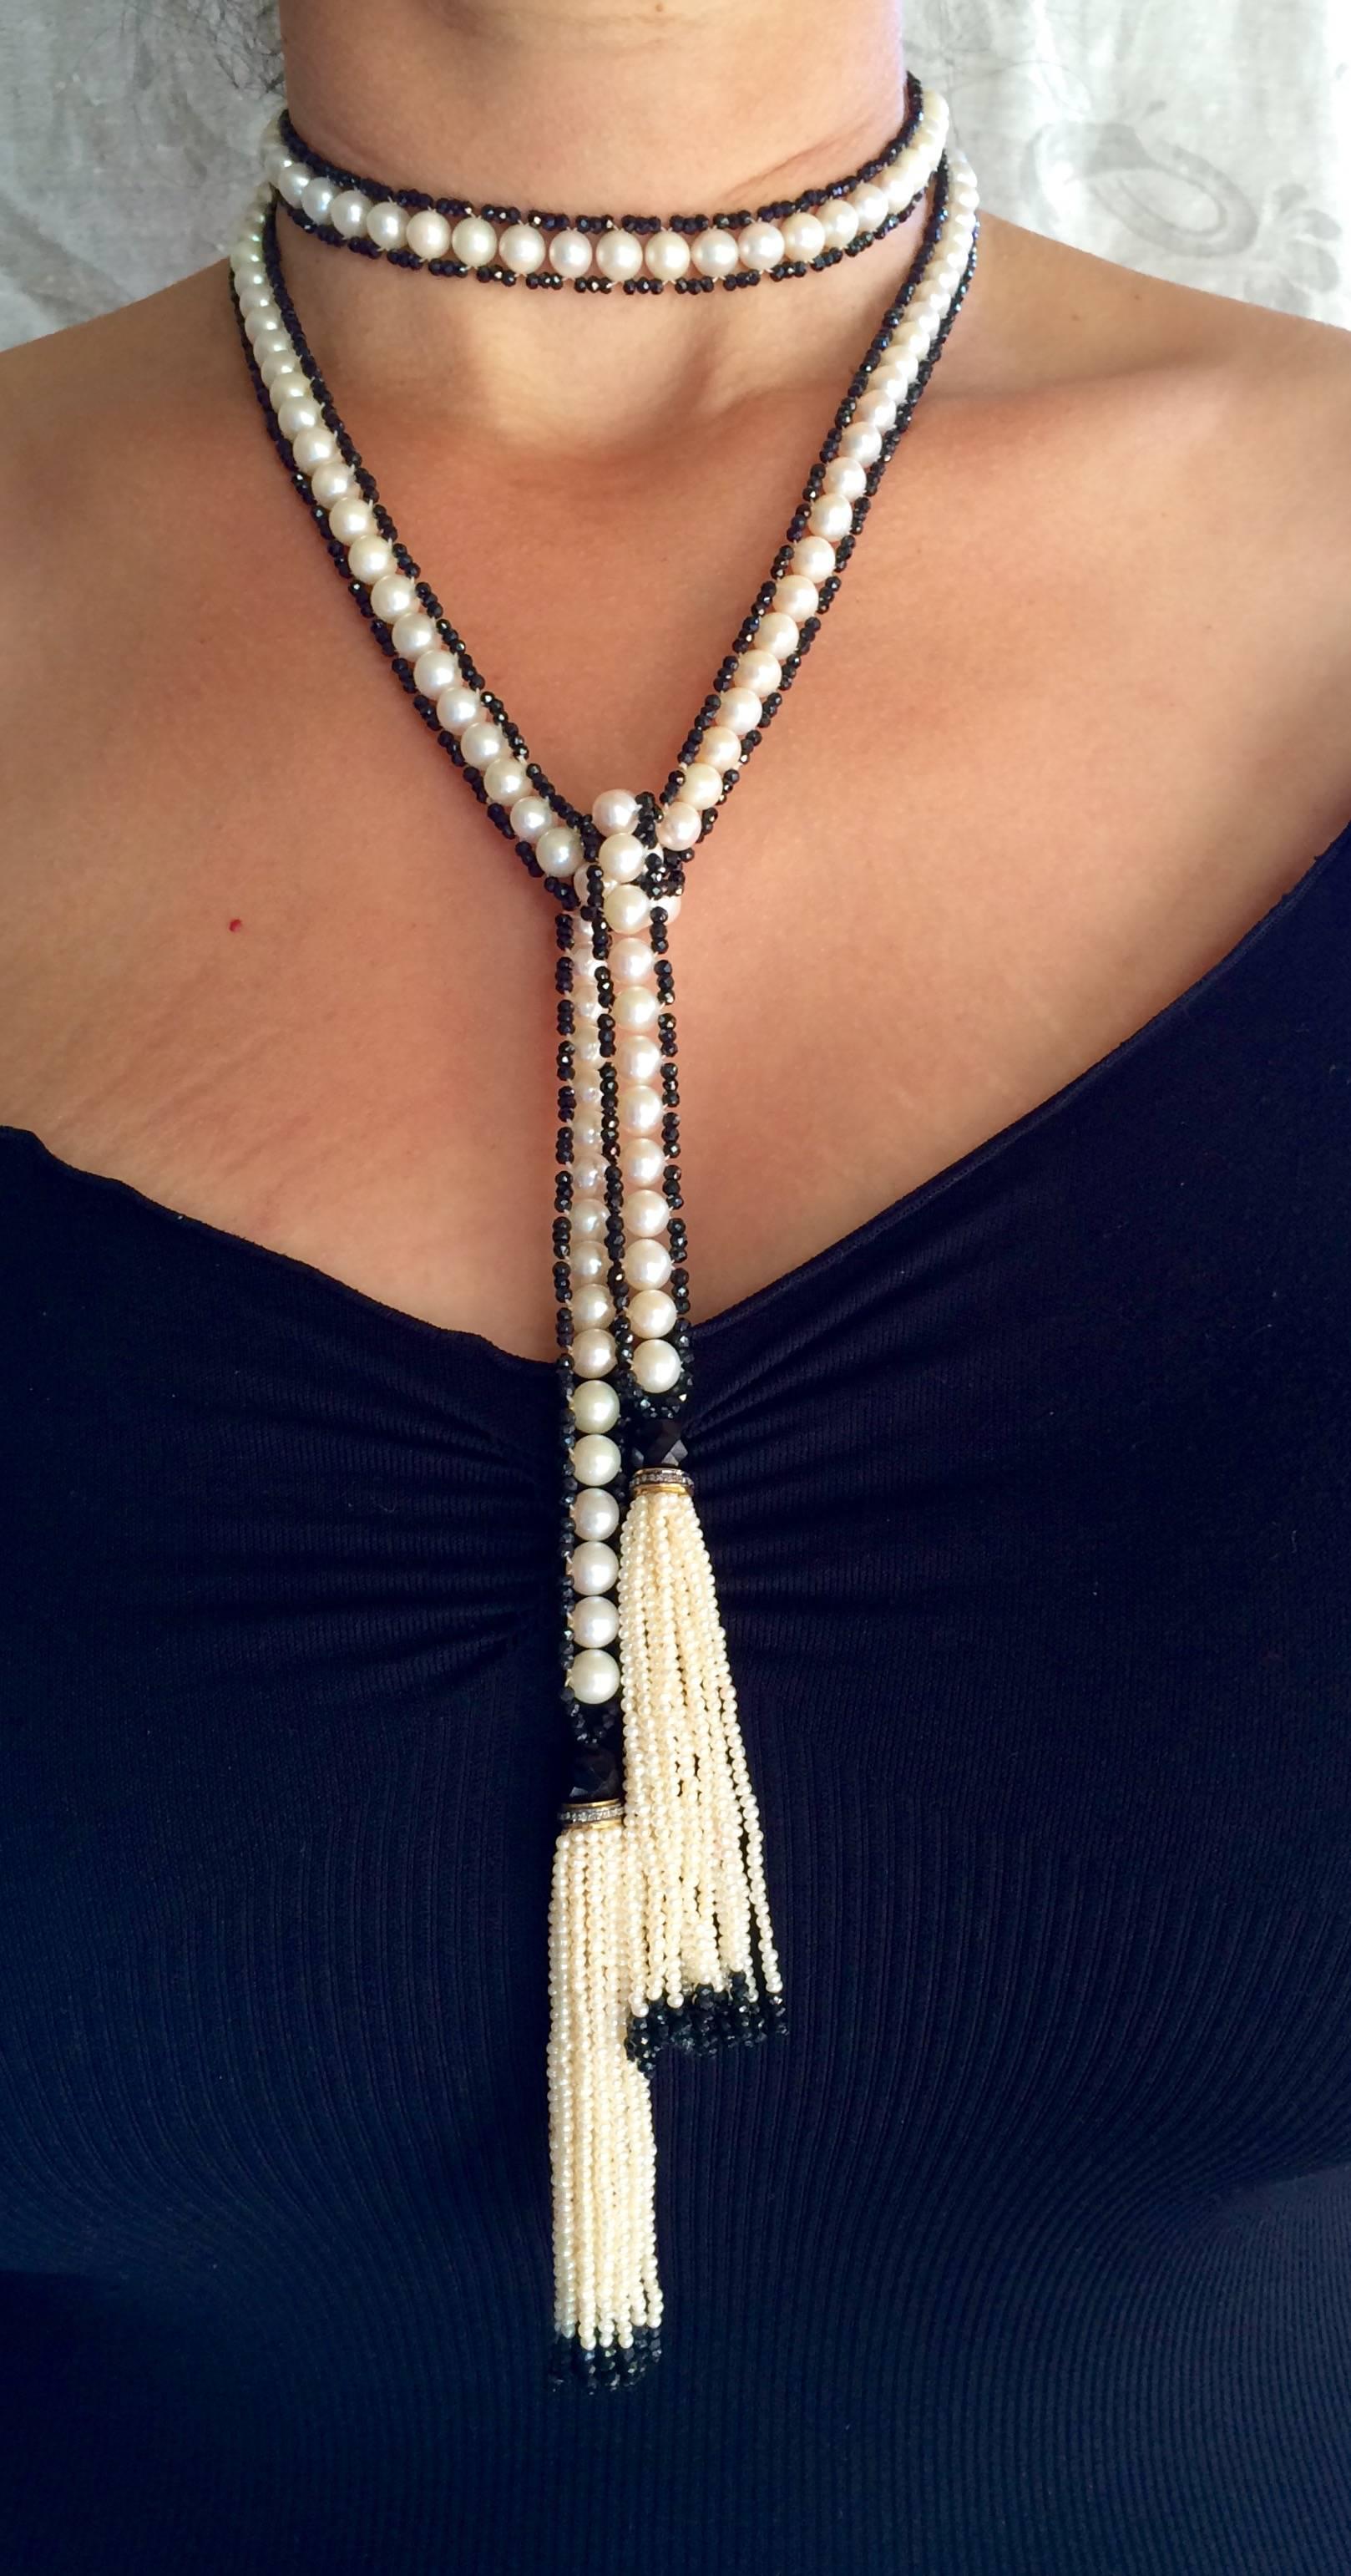 Woven White Pearl, Faceted Black Spinel, and Onyx Beaded Sautoir by Marina J  5